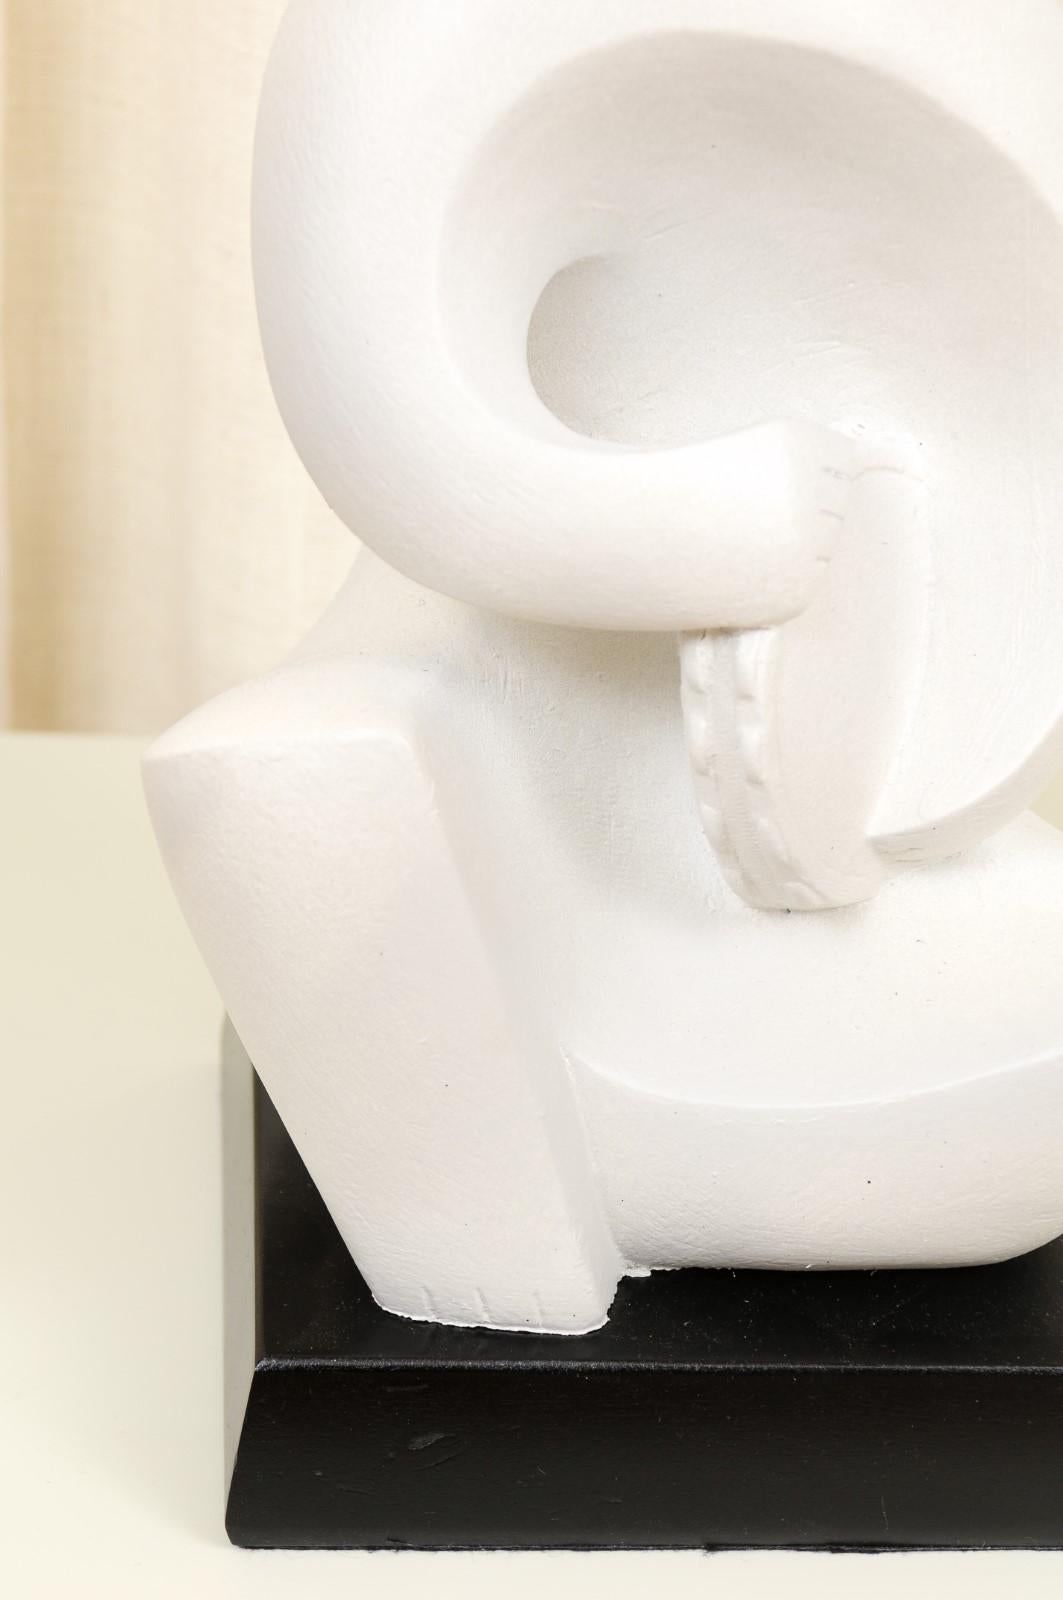 Remarkable Restored Pair of Plaster Cubist Figures by RIMA, New York, circa 1940 For Sale 2